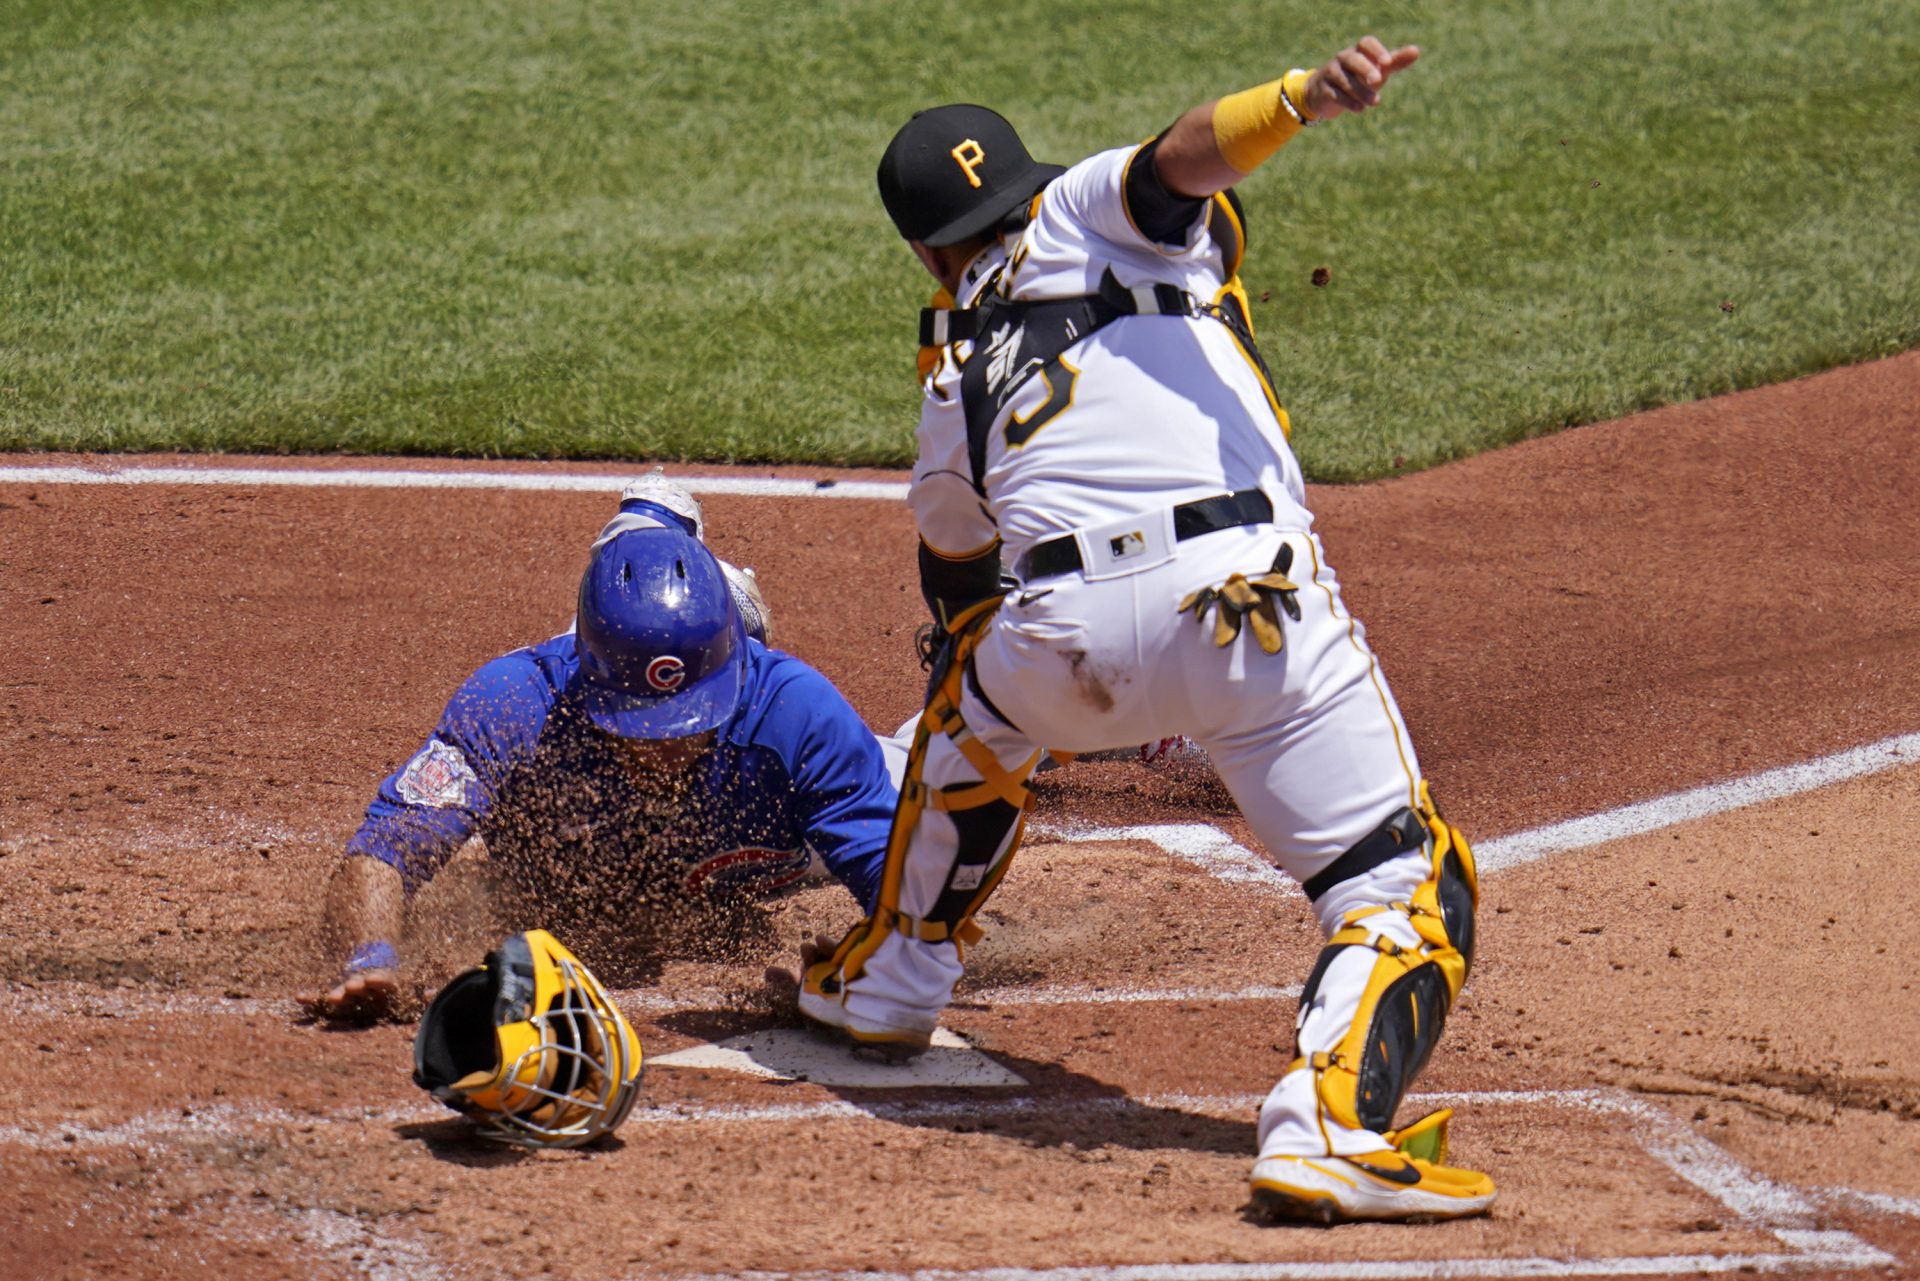 Chicago Cubs' Willson Contreras, left, scores ahead of the tag attempt by Pittsburgh Pirates catcher Michael Perez during the third inning of a baseball game in Pittsburgh, Thursday, May 27, 2021. Contreras scored on a fielder's choice by Javier Baez.